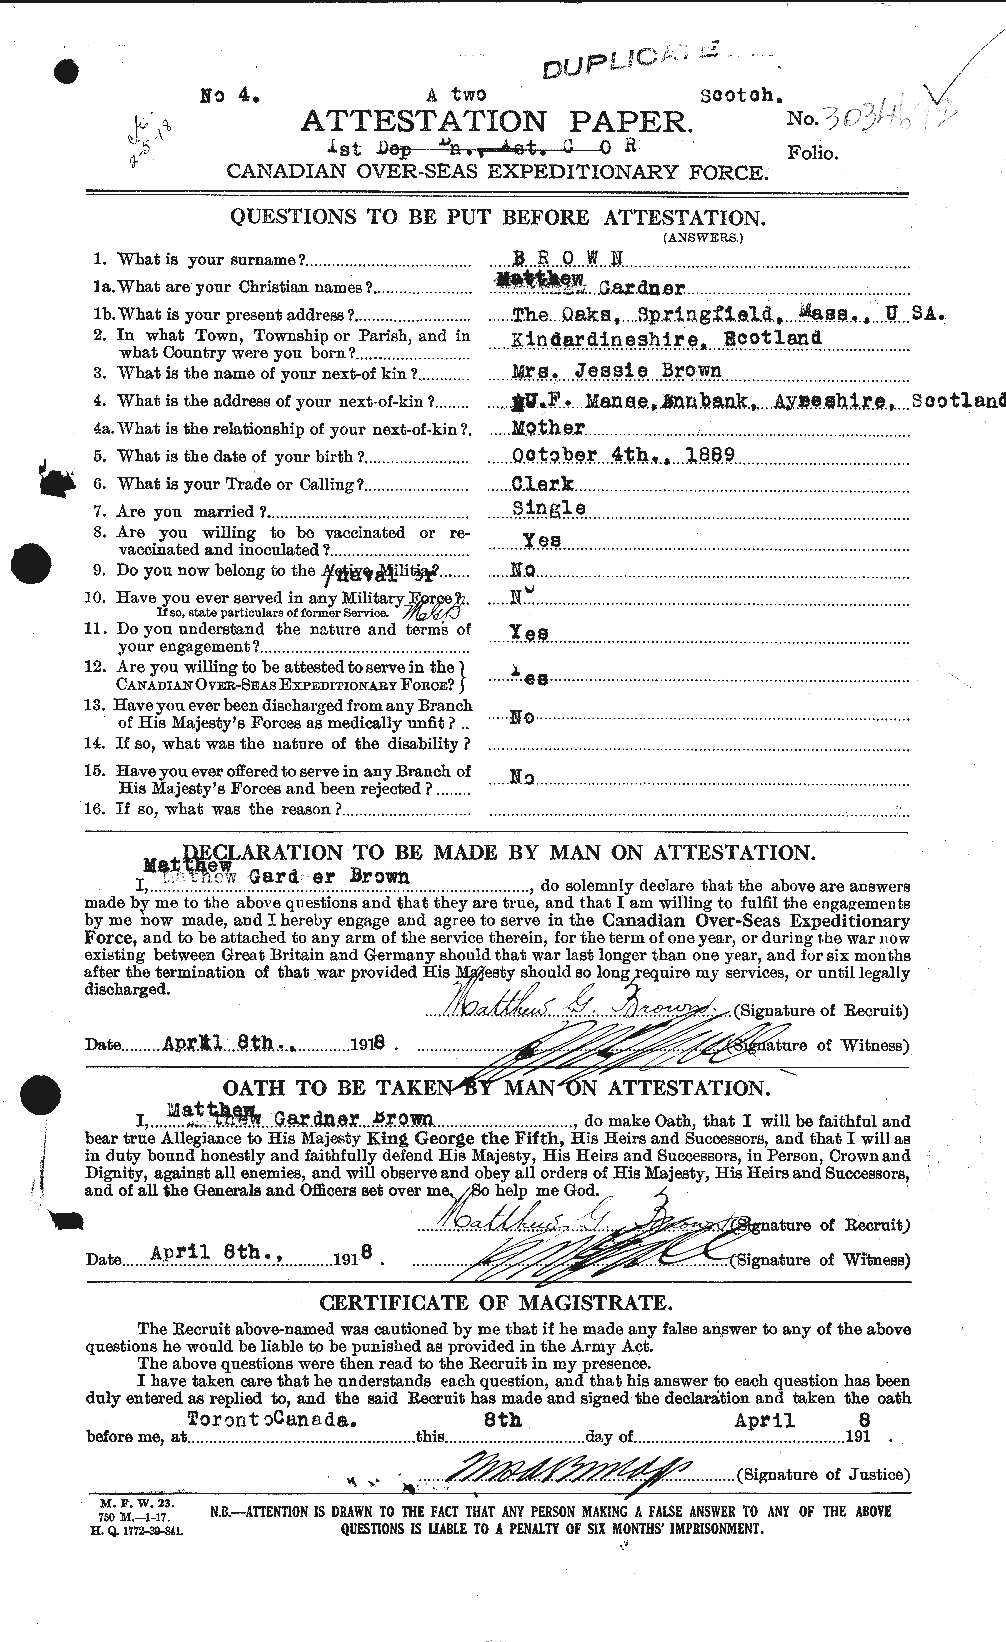 Personnel Records of the First World War - CEF 266369a